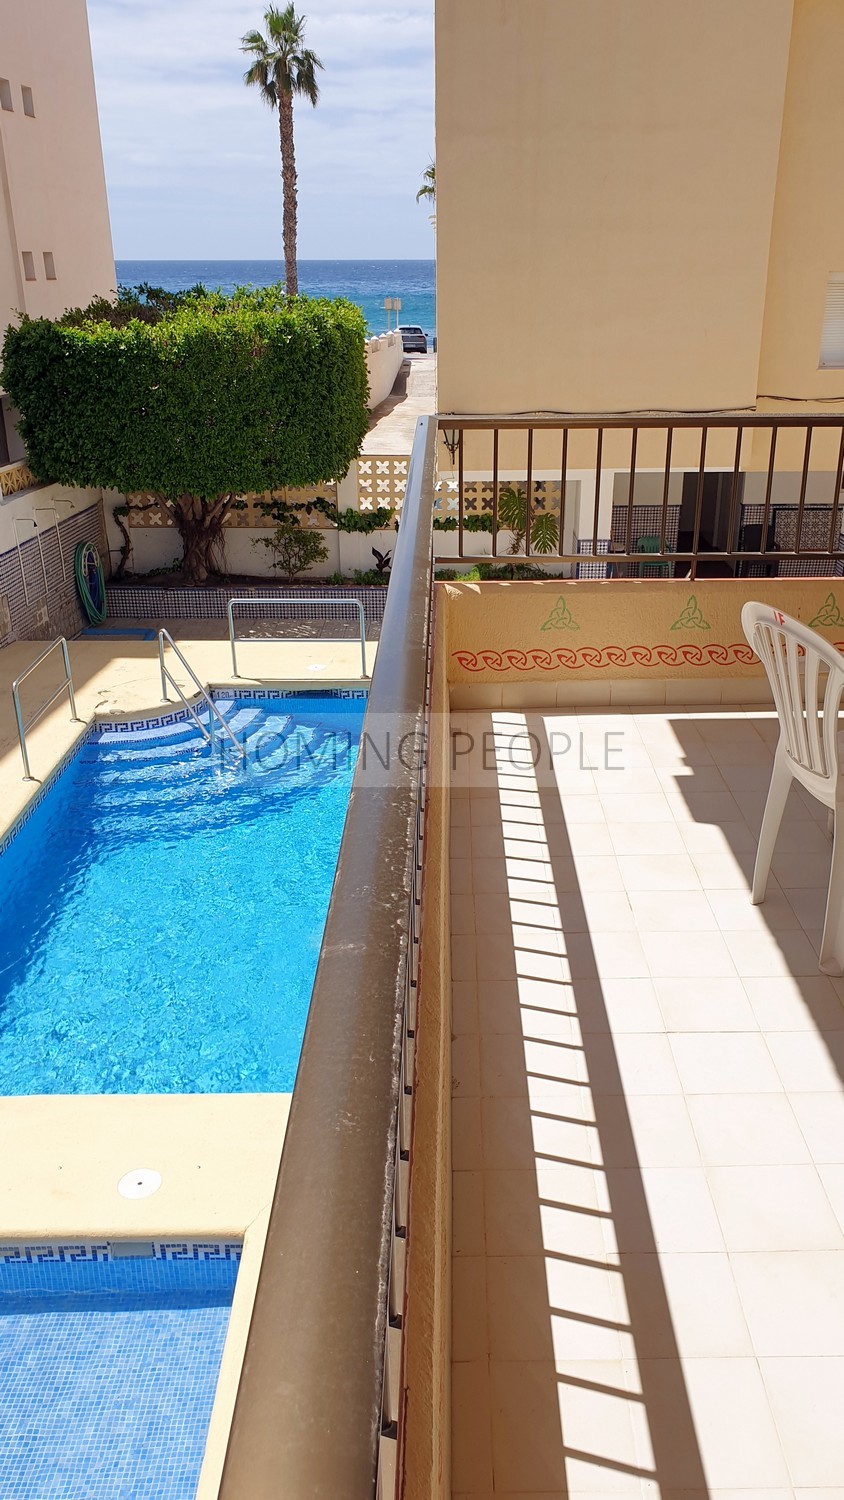 [SOLD]: Bright apartment in seafront building with swimming pool and parking space